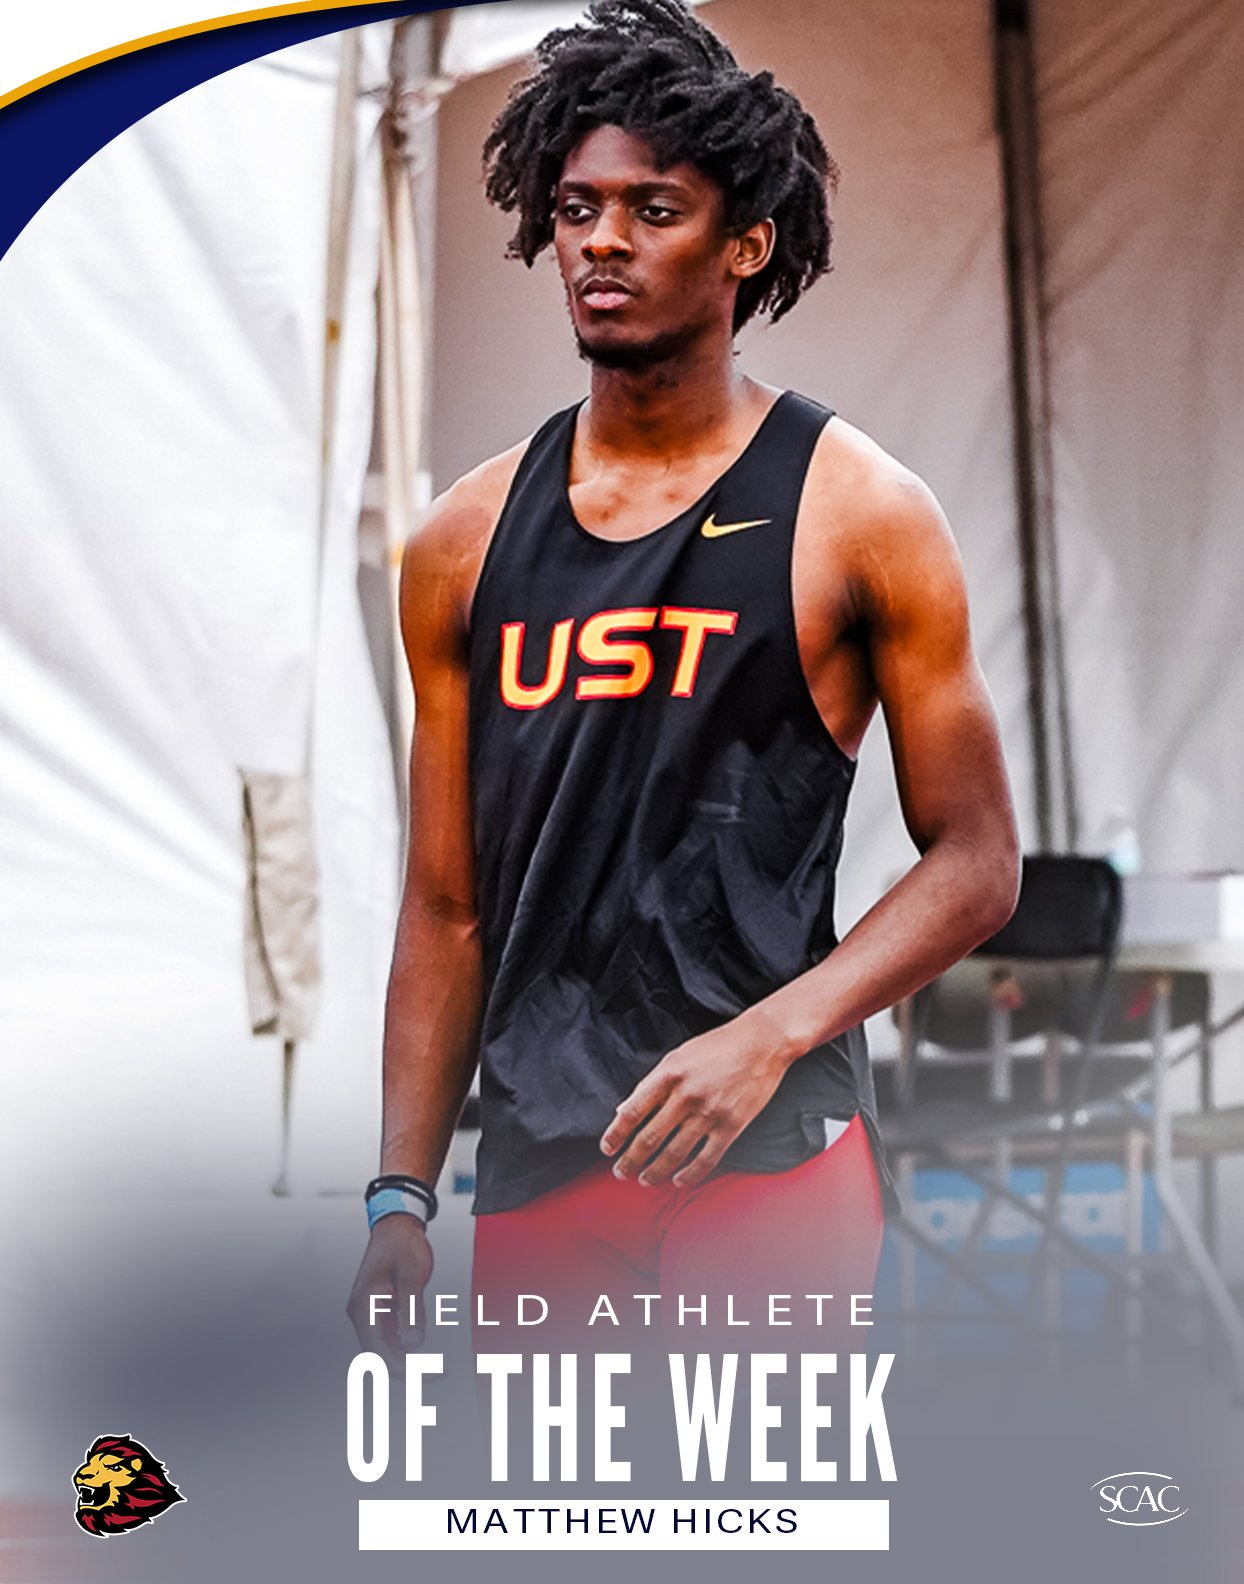 Hicks Leaps into Second Field Athlete of the Week Honor